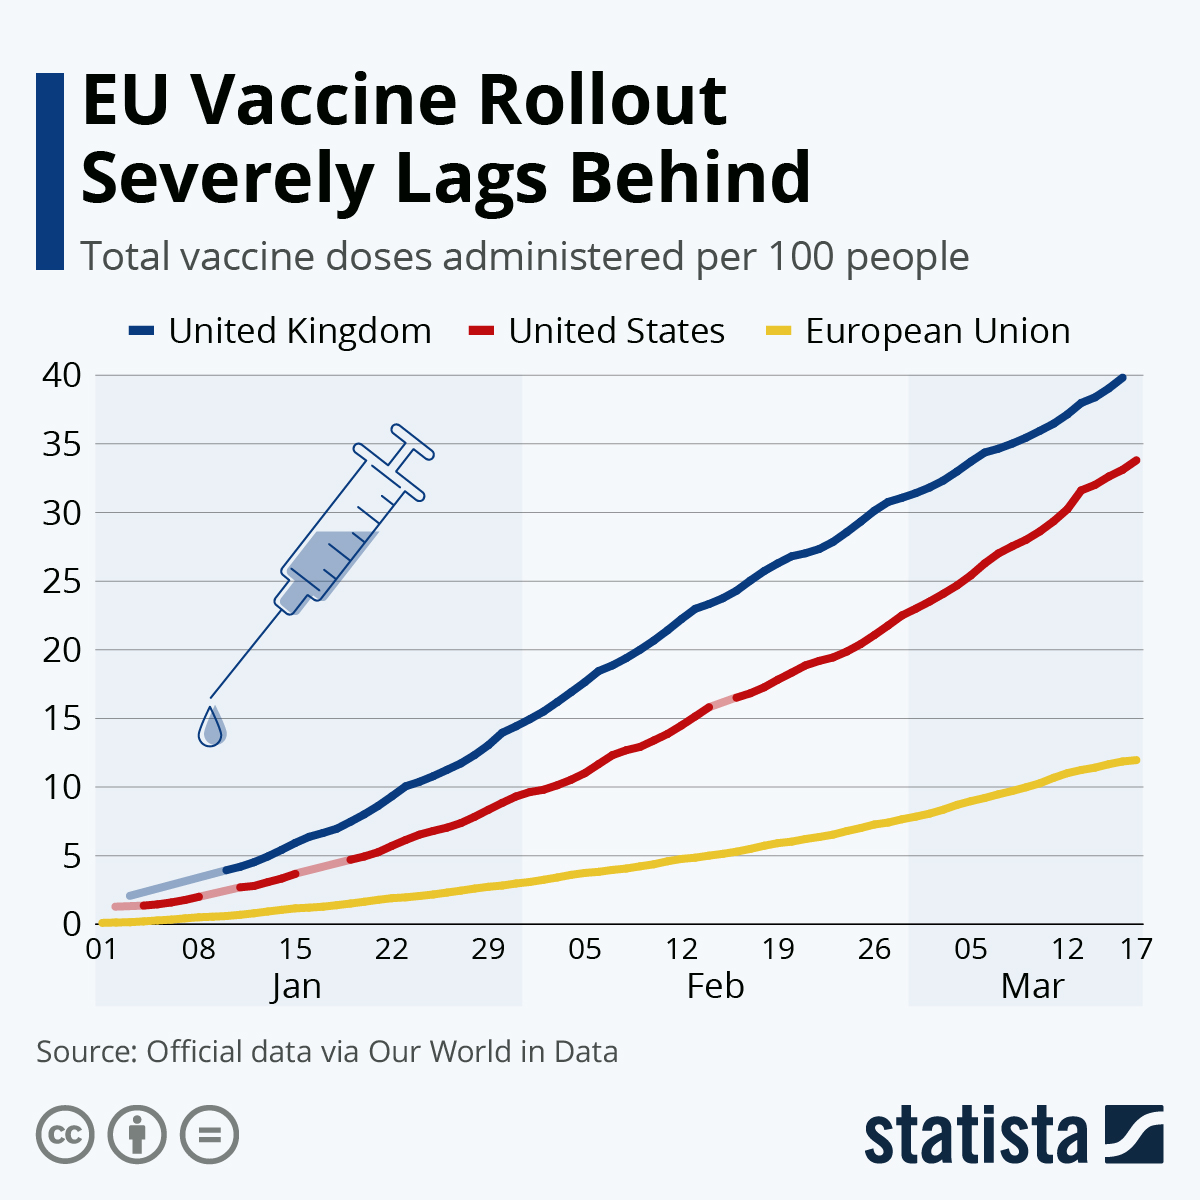 EU Vaccine Rollout Severely Lags Behind